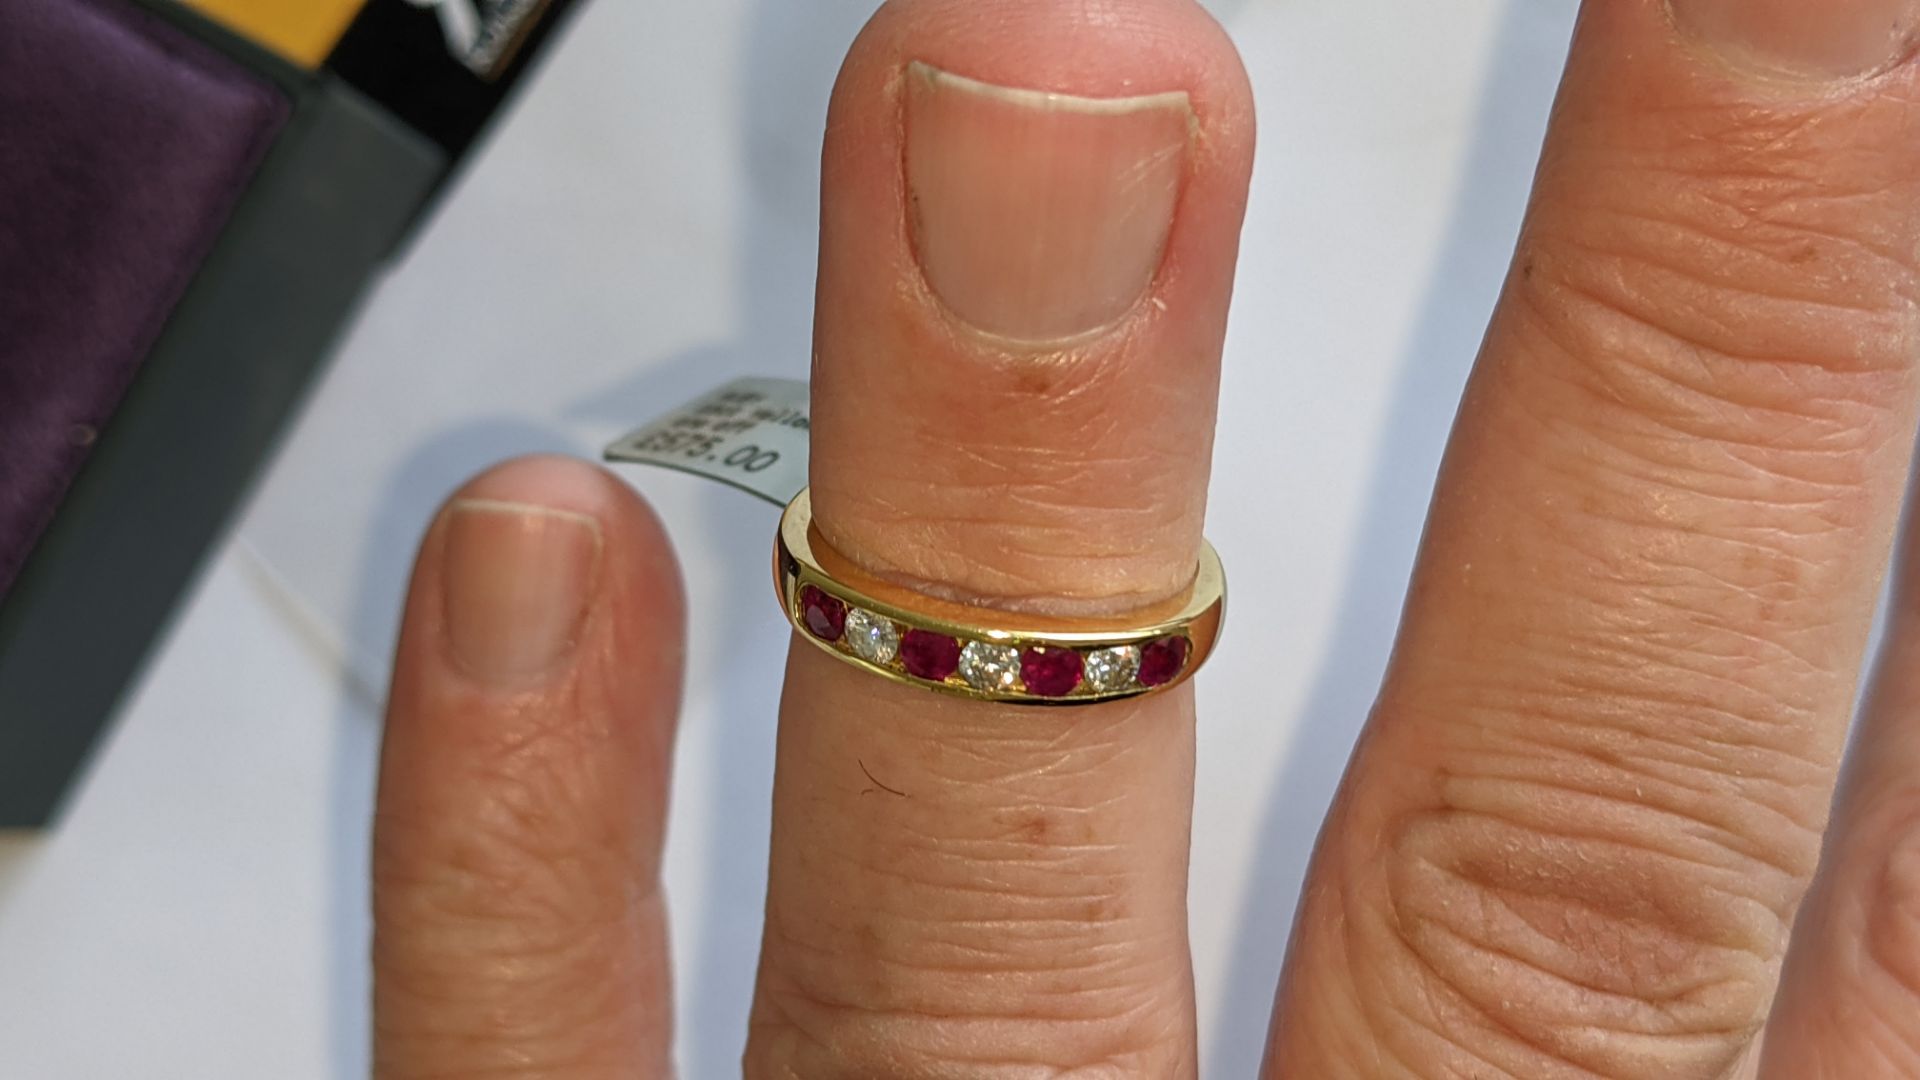 18ct yellow gold ring with rubies & what are assumed to be diamonds. RRP £575 - Image 13 of 14